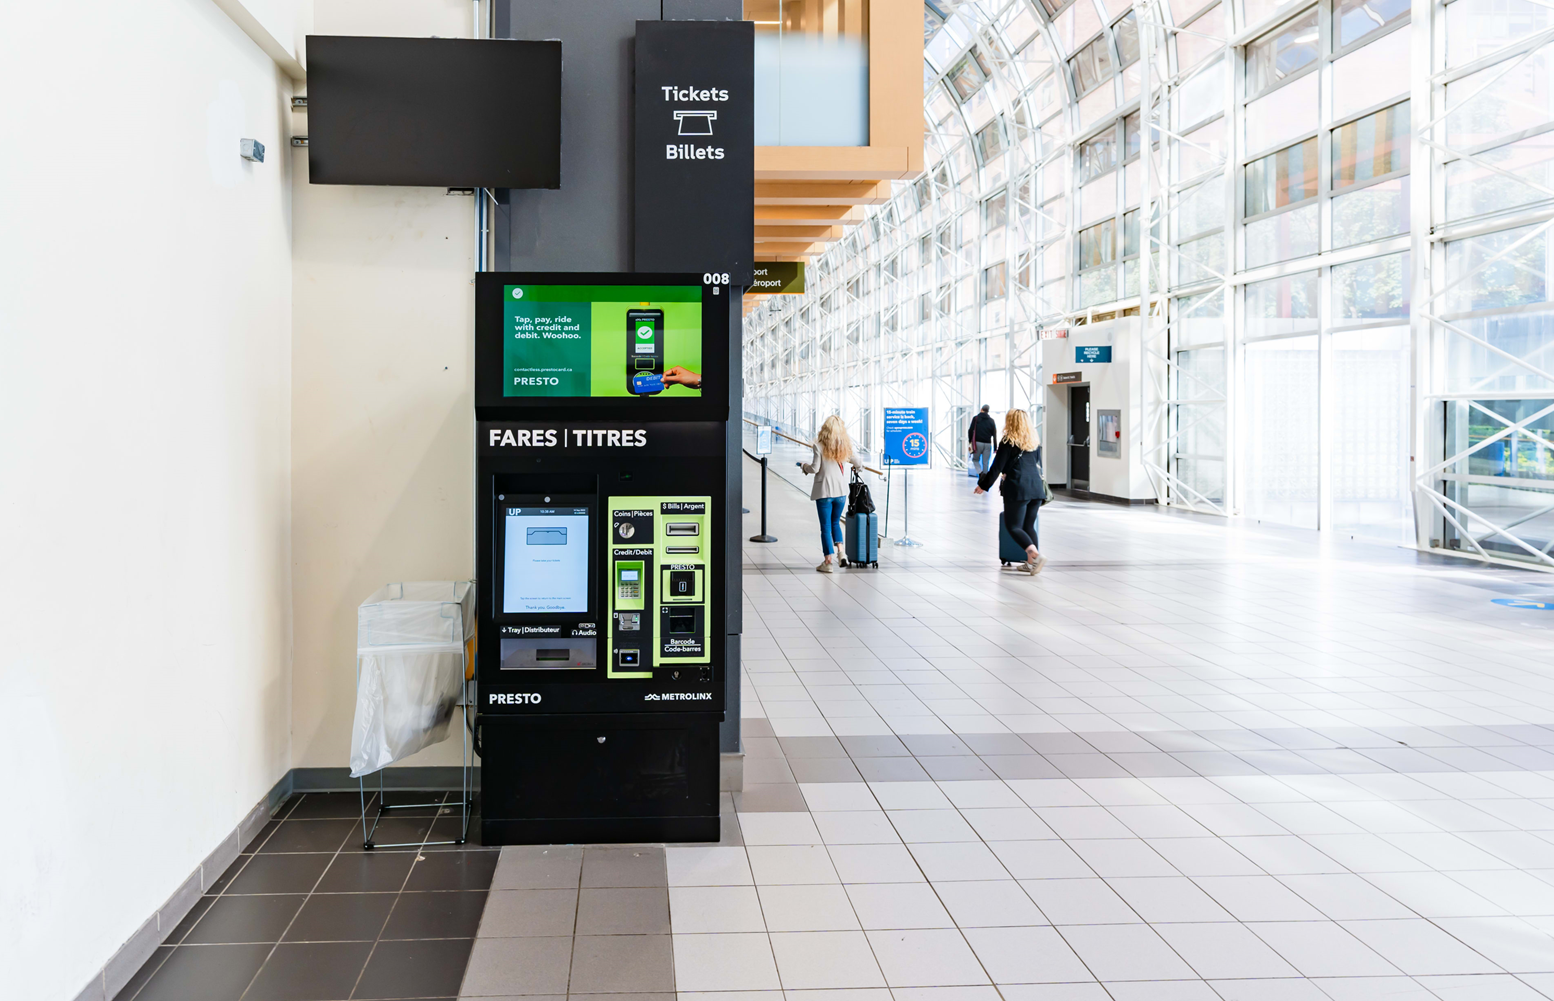 Sigma started to install a new generation of  Ticket Vending Machines (TVMs) in Toronto, Canada